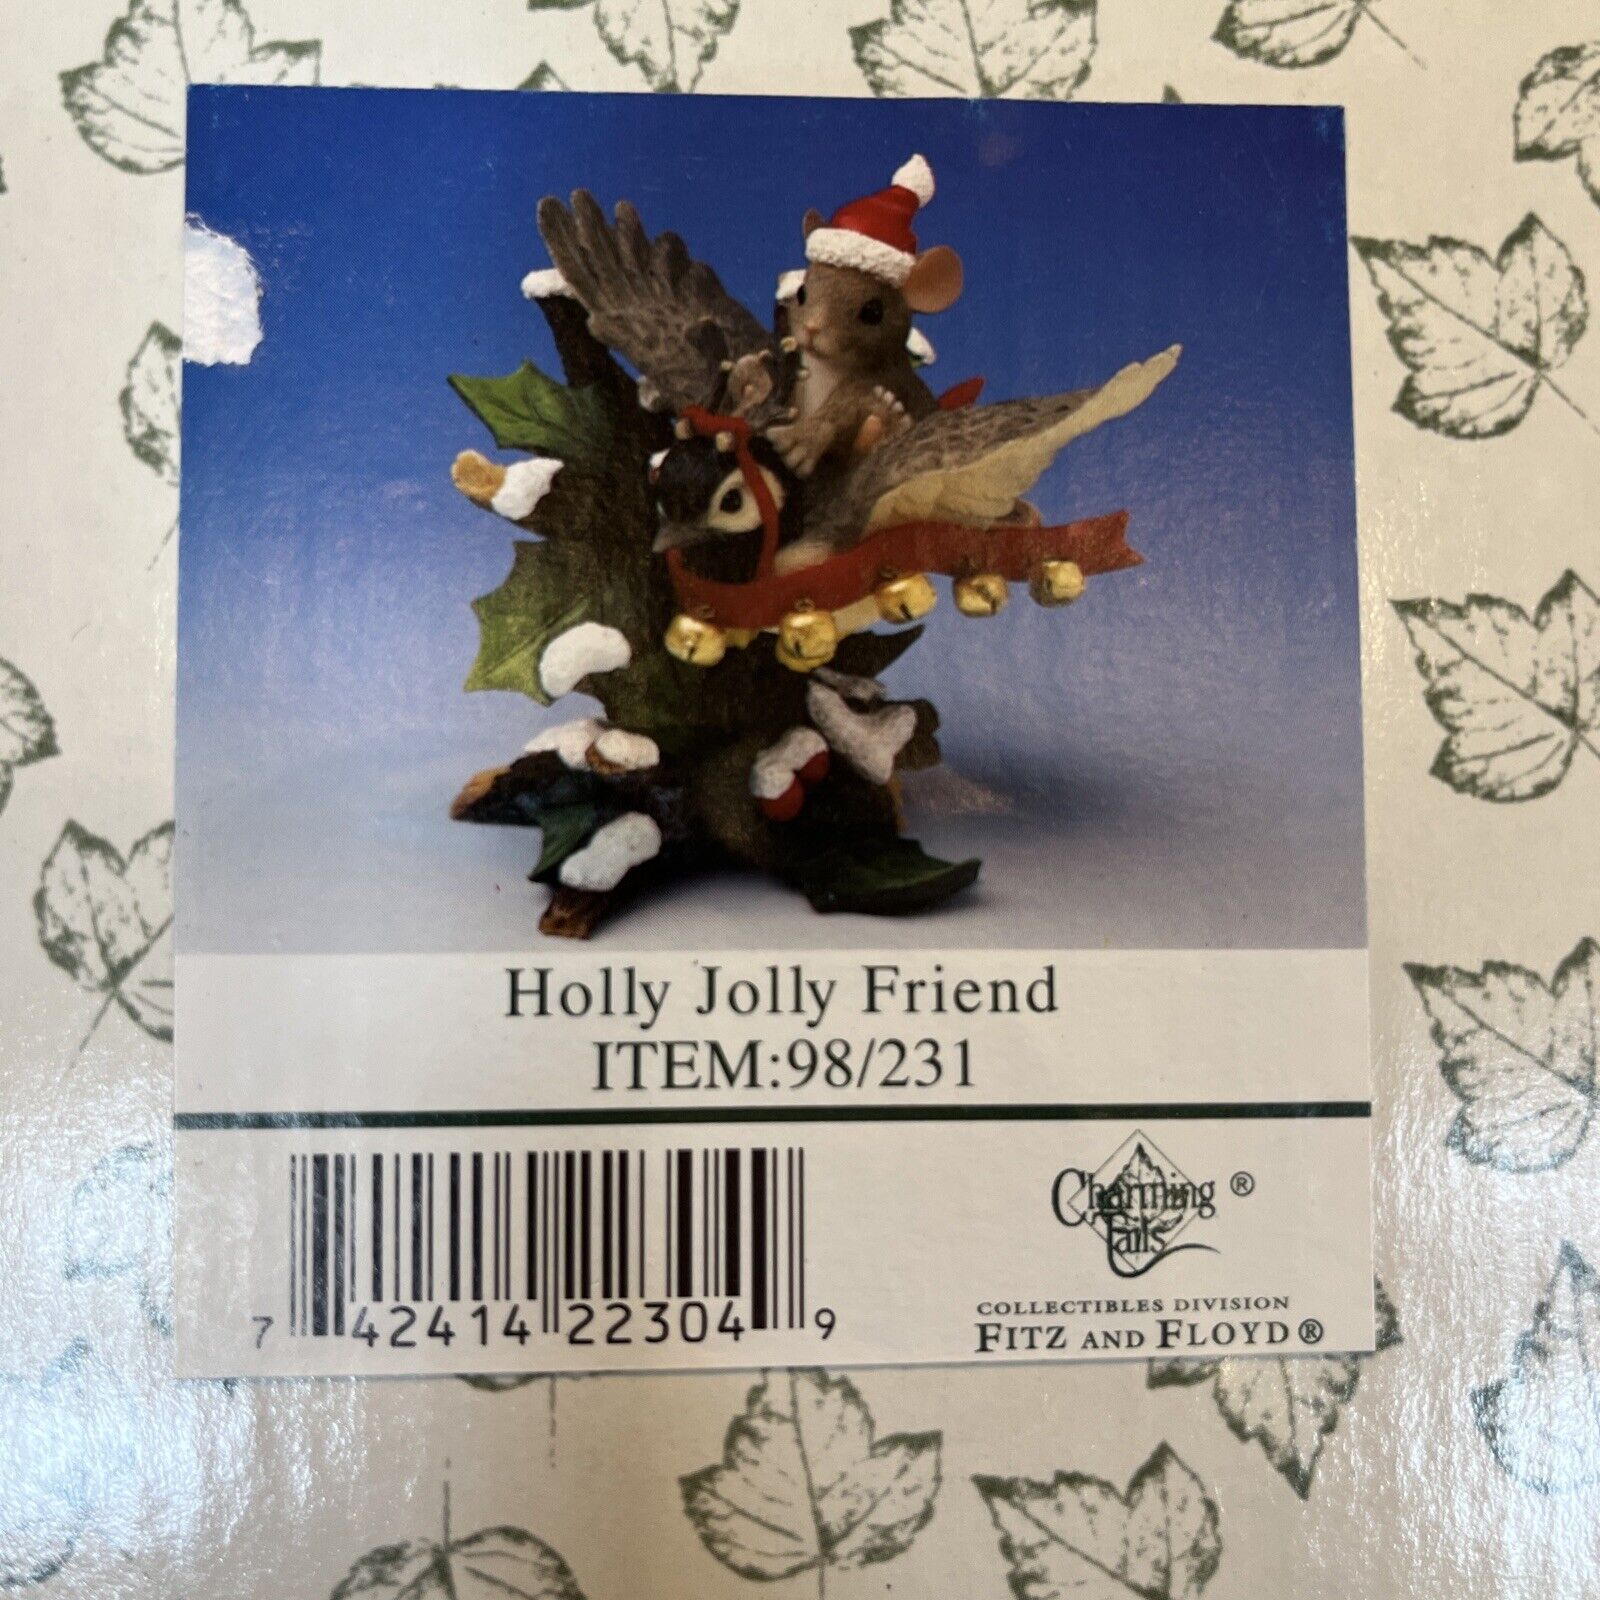 Charming Tails Fitz and Floyd Holly Jolly Friend 98/231